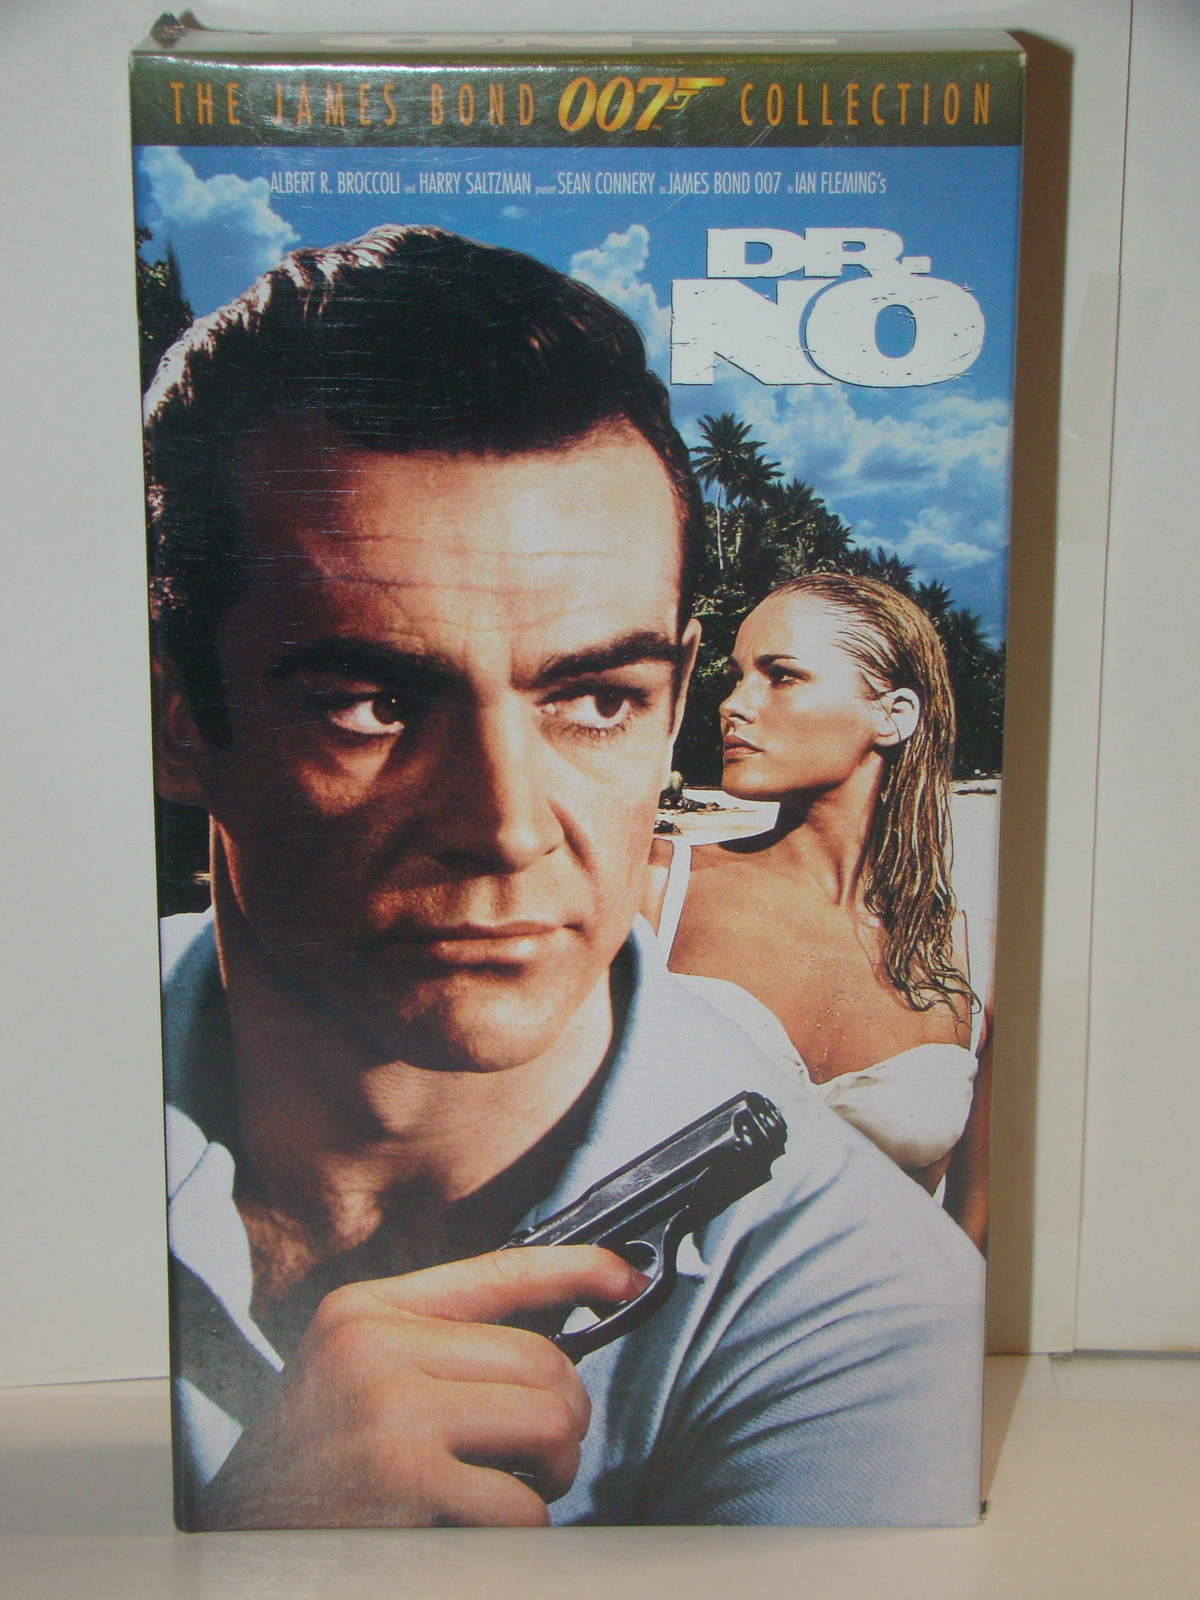 THE JAMES BOND 007 COLLECTION - DR. NO (VHS) - VHS Tapes